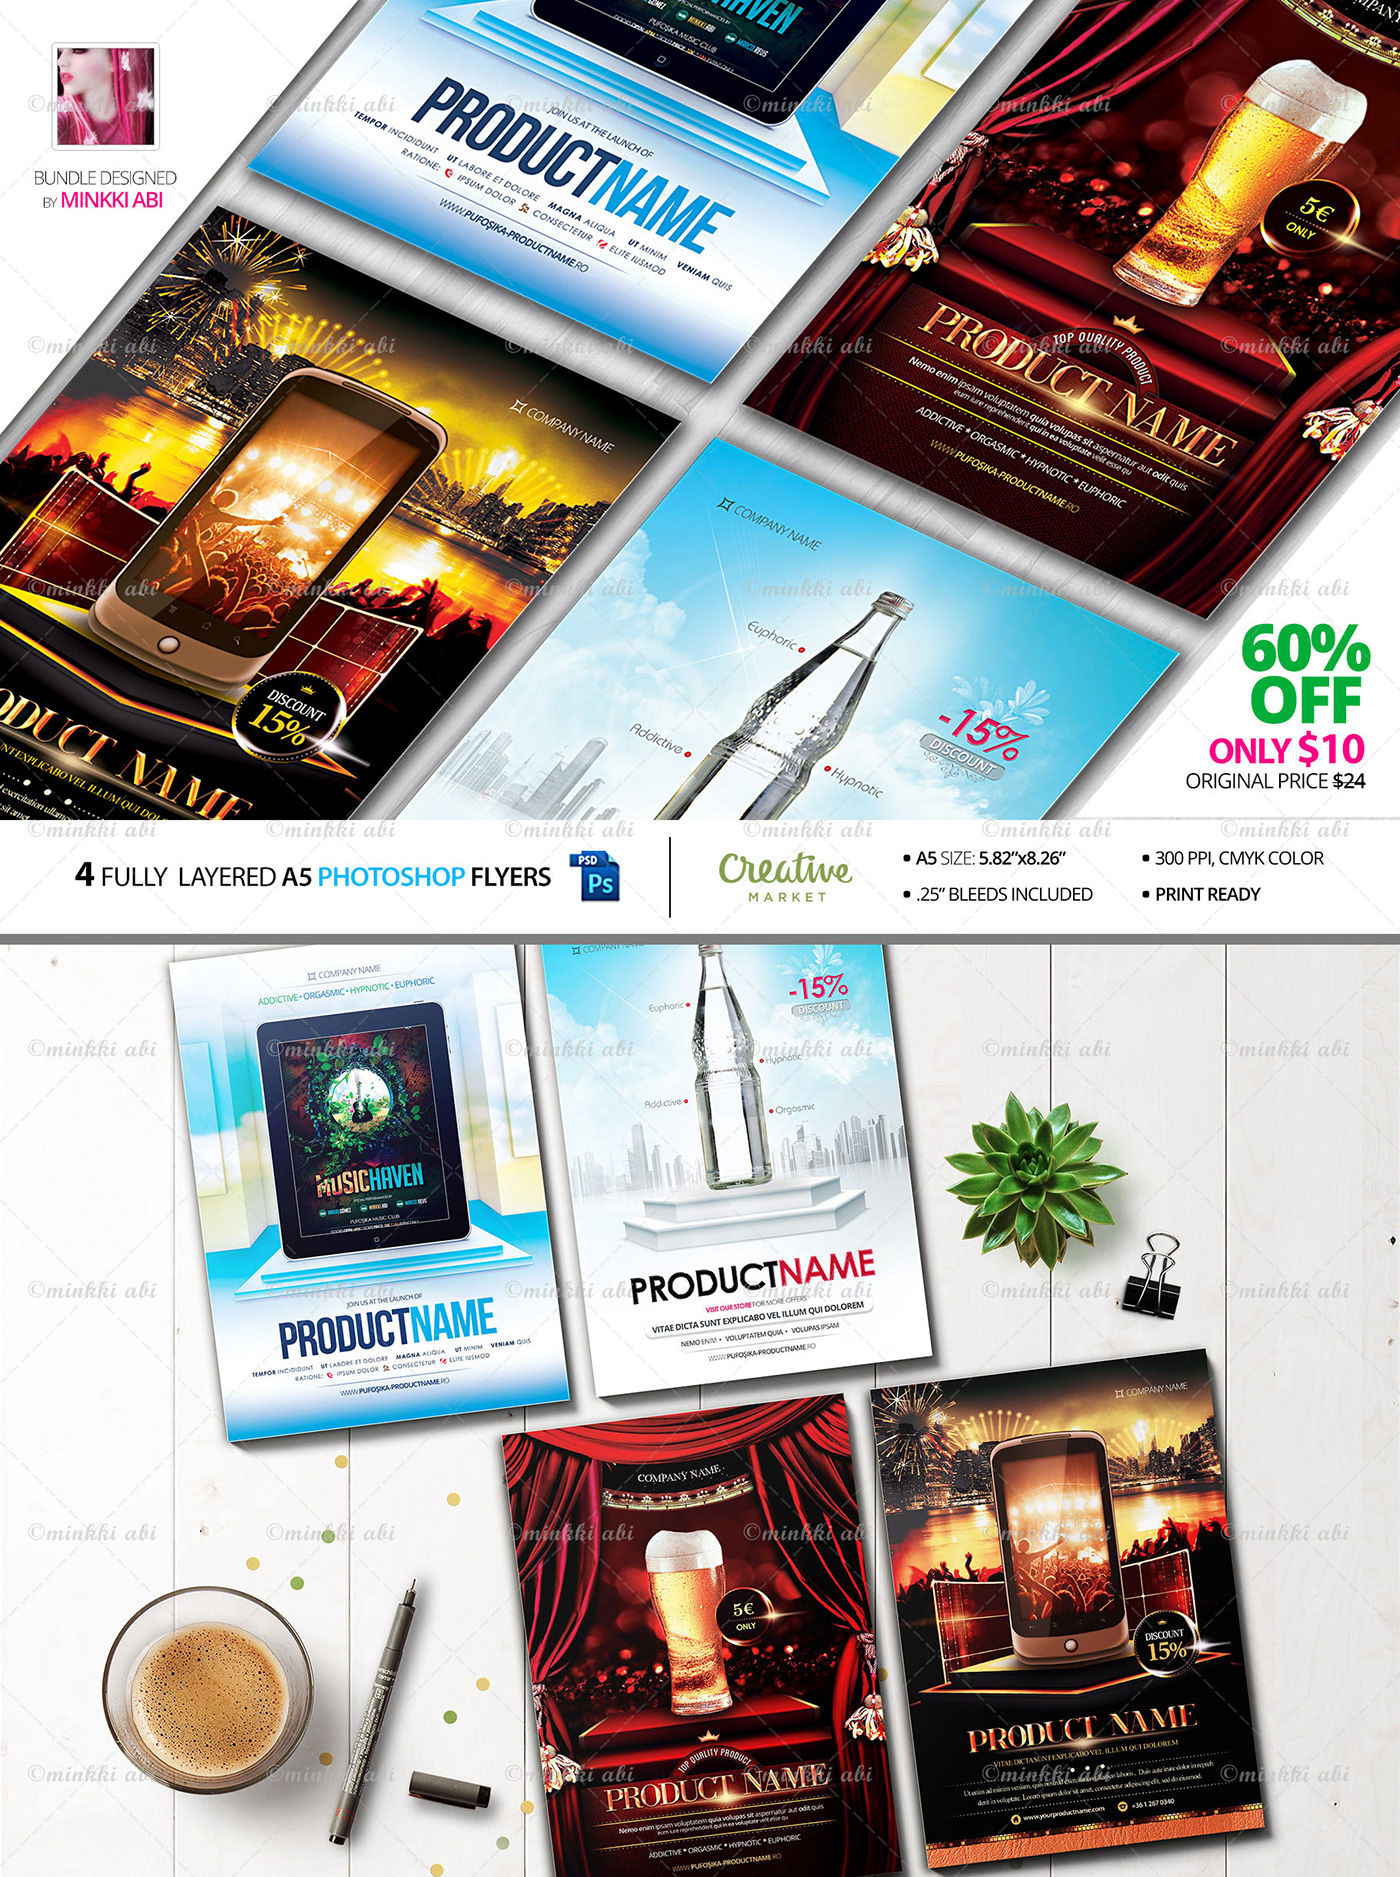 products promotion flyers drink promotions drinks ad advertising template clean advertise cocktails promo posters presentation flyer beer bottles TV Phone Tablet iPad podium crowd stage stages